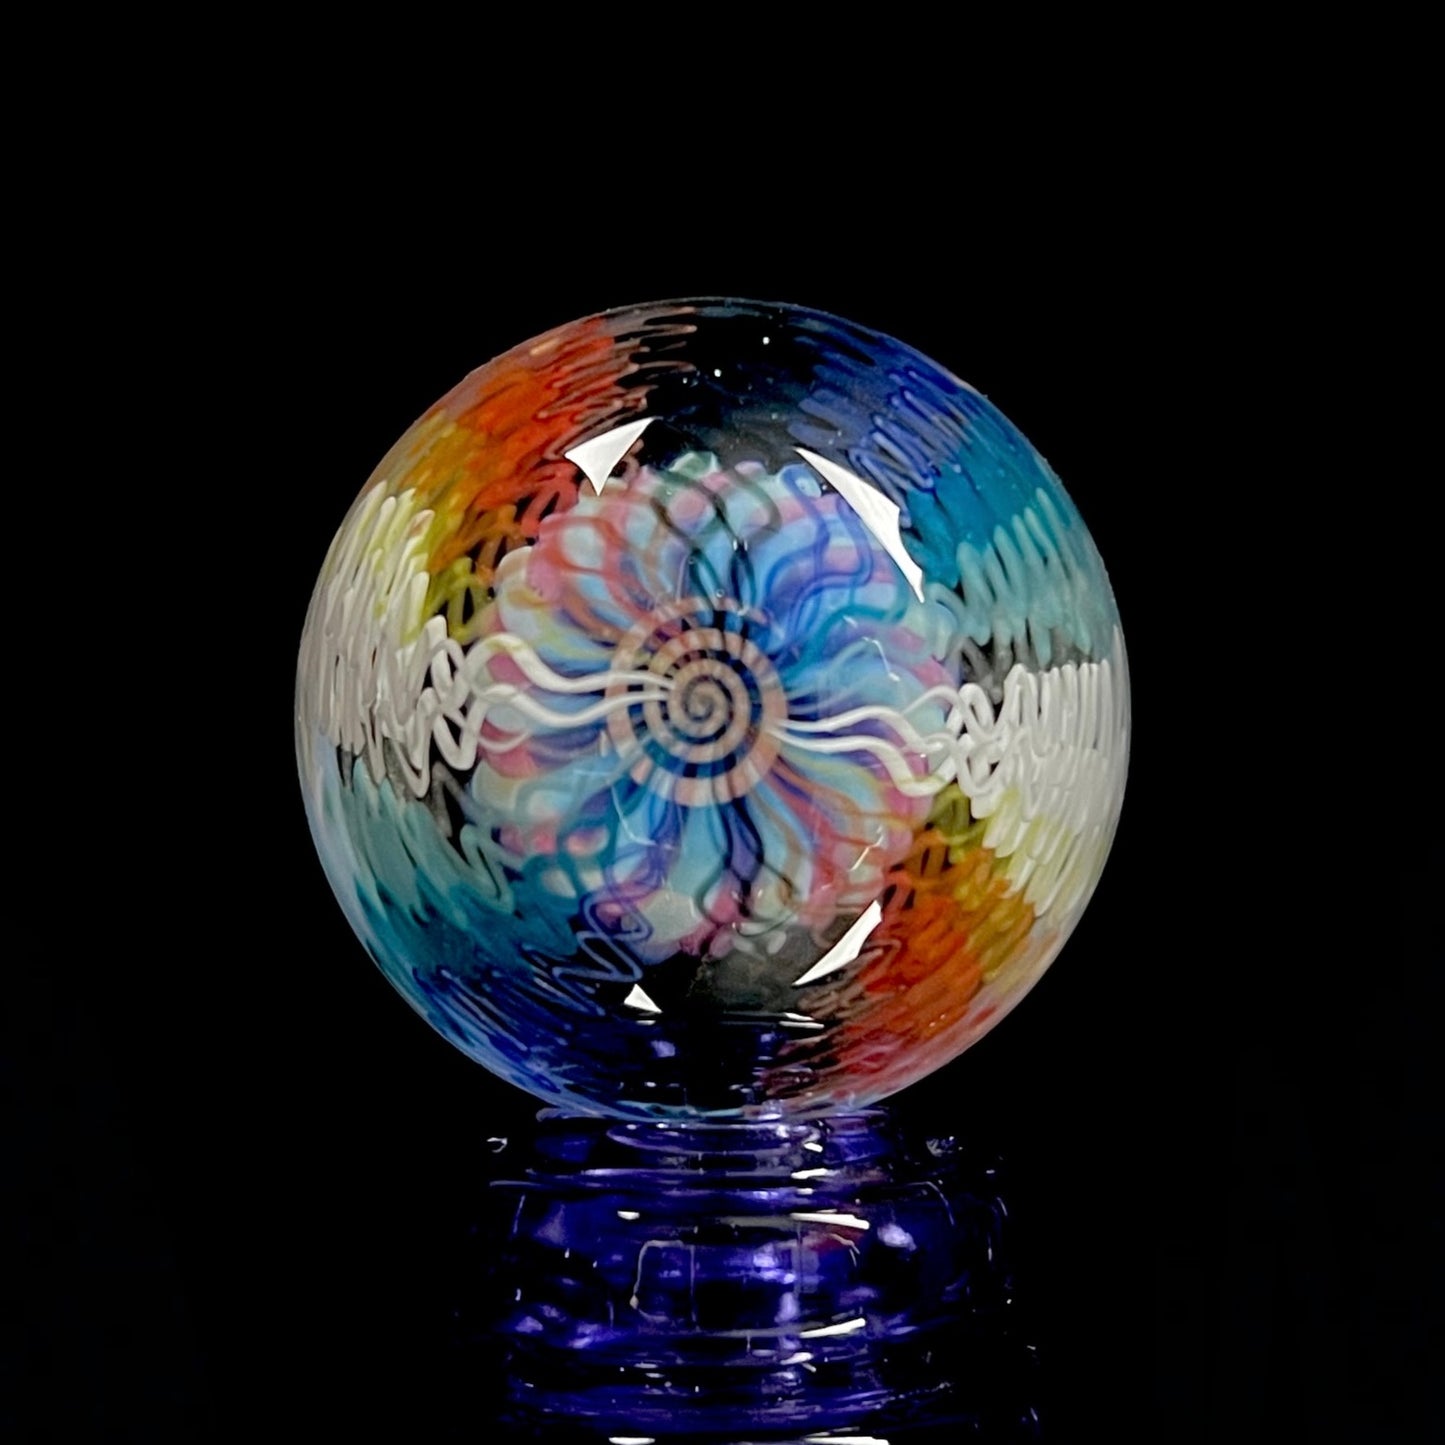 Fire & Ice Wig Wag Marble by Jared Wetmore